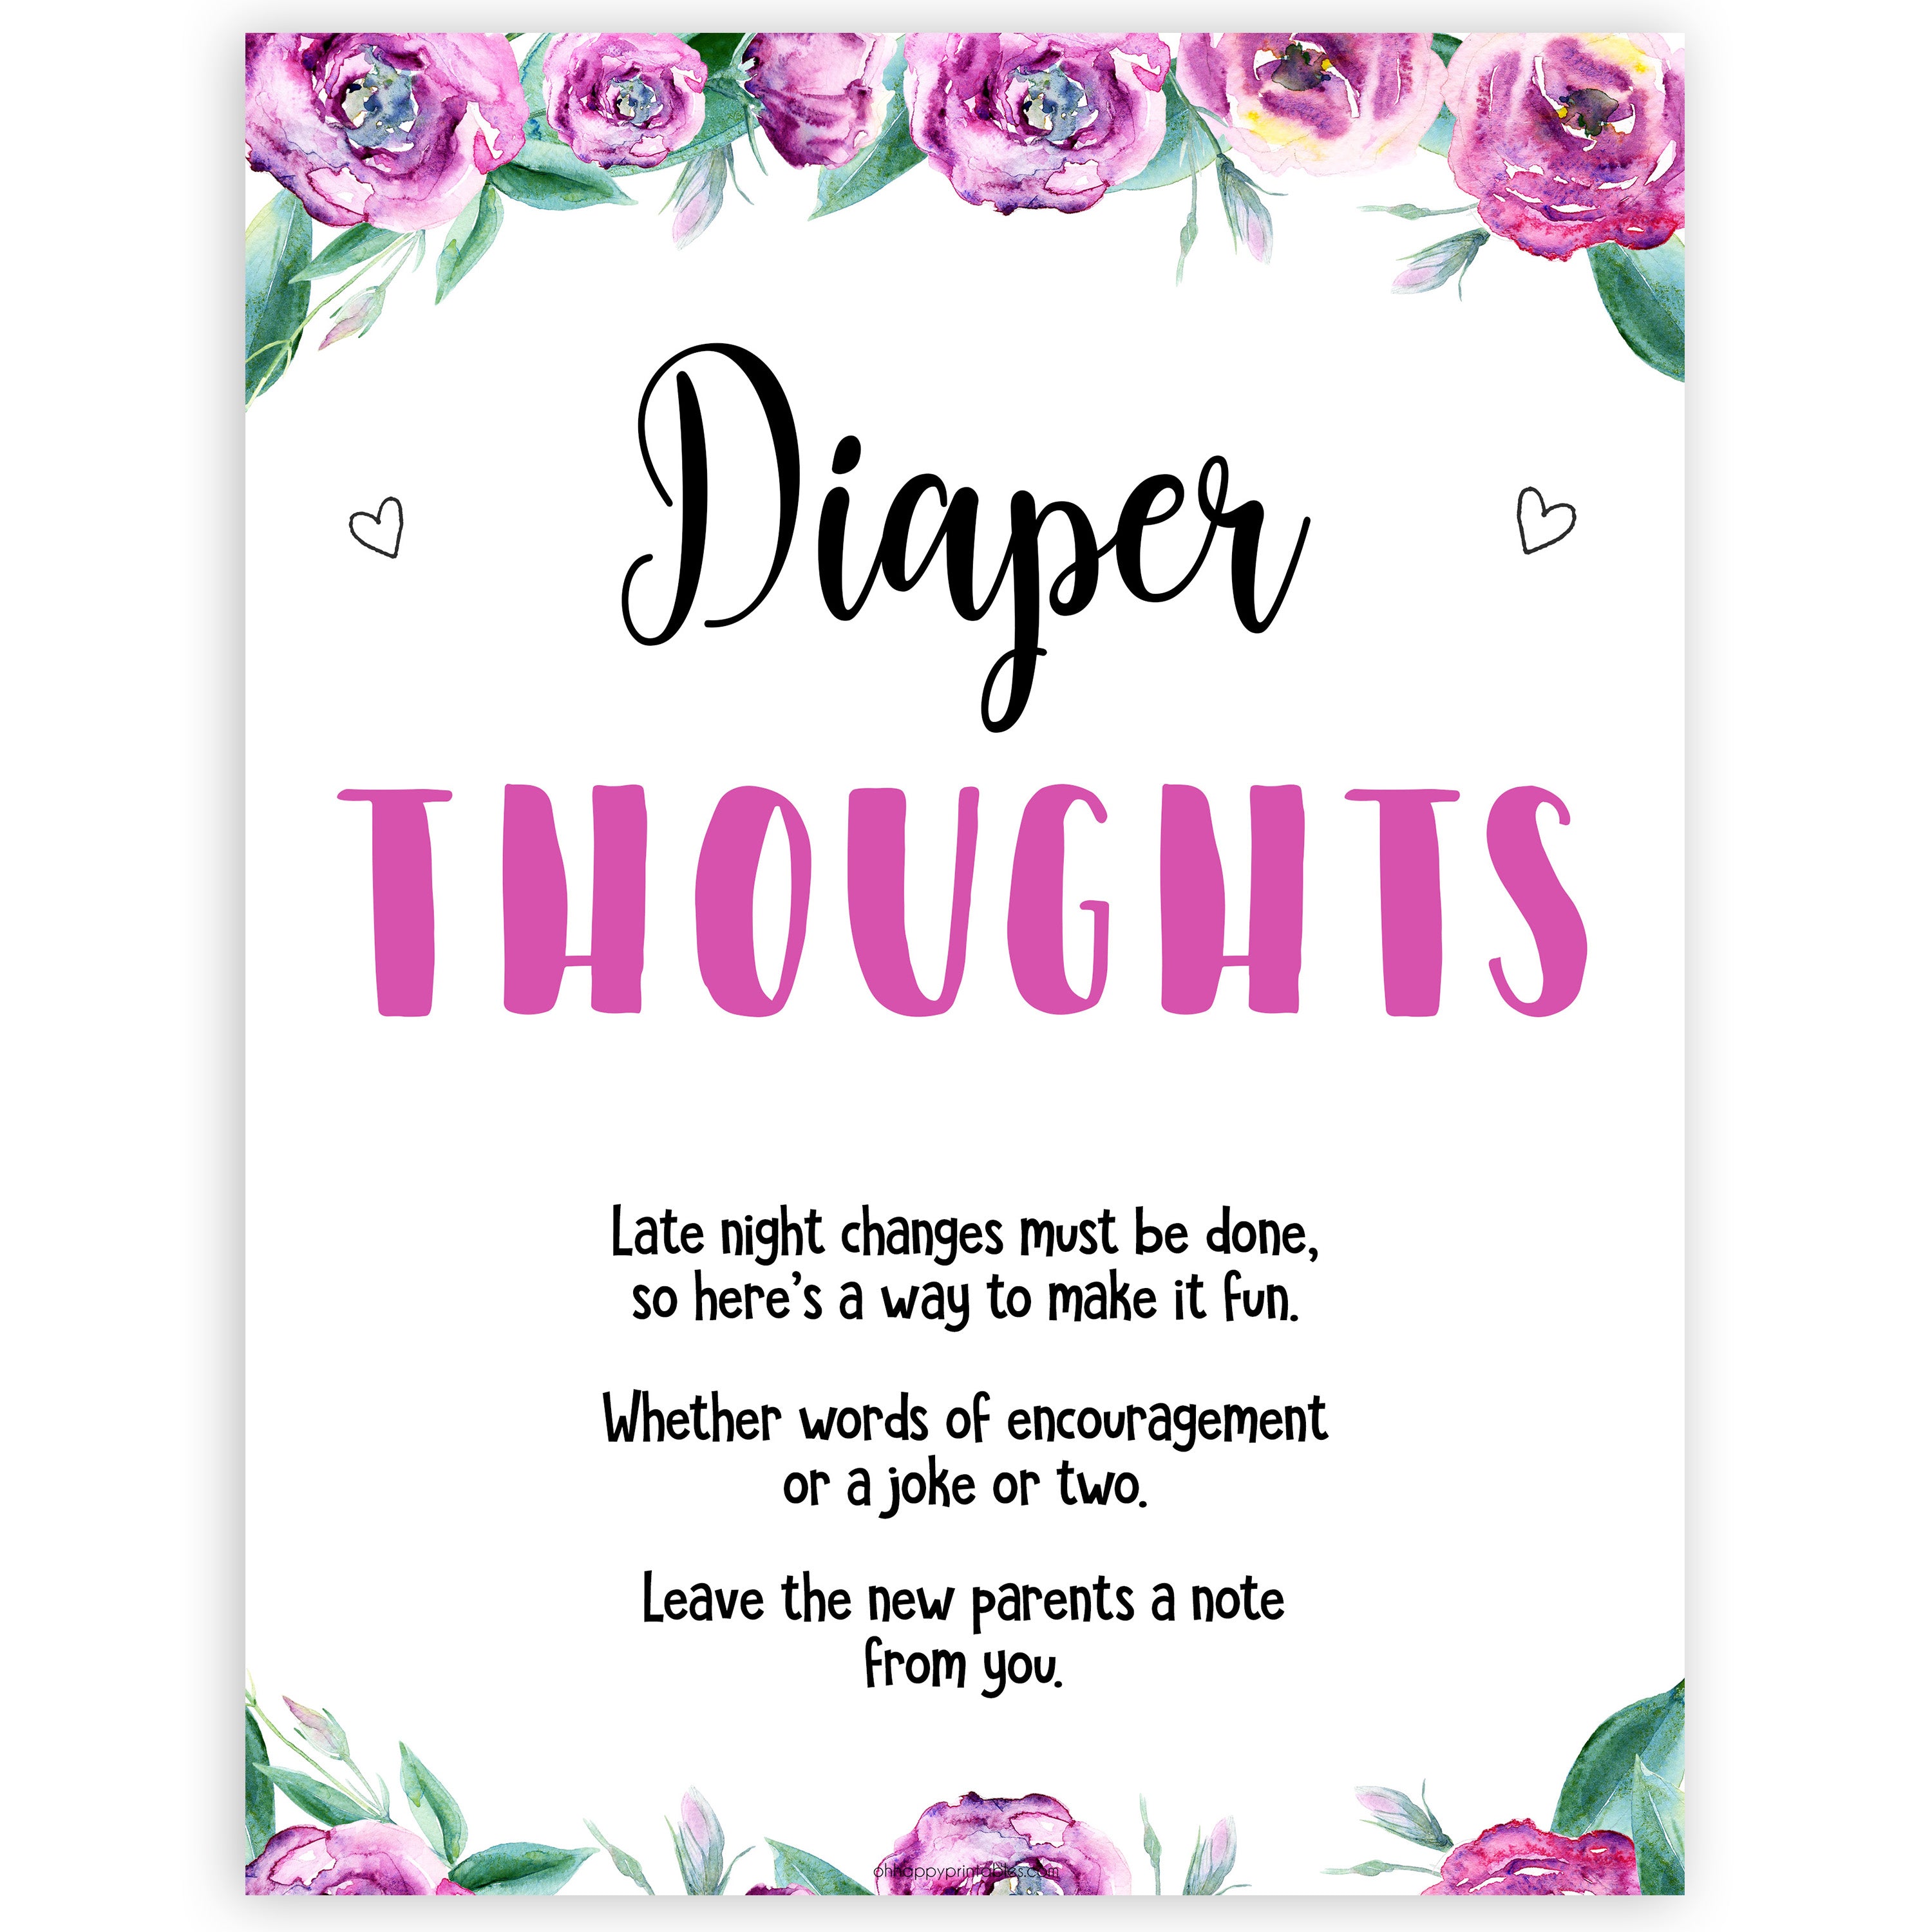 Purple peonies diaper thoughts baby shower games, printable baby shower games, fun baby shower games, baby shower games, popular baby shower games, floral baby shower games, purple baby shower themes